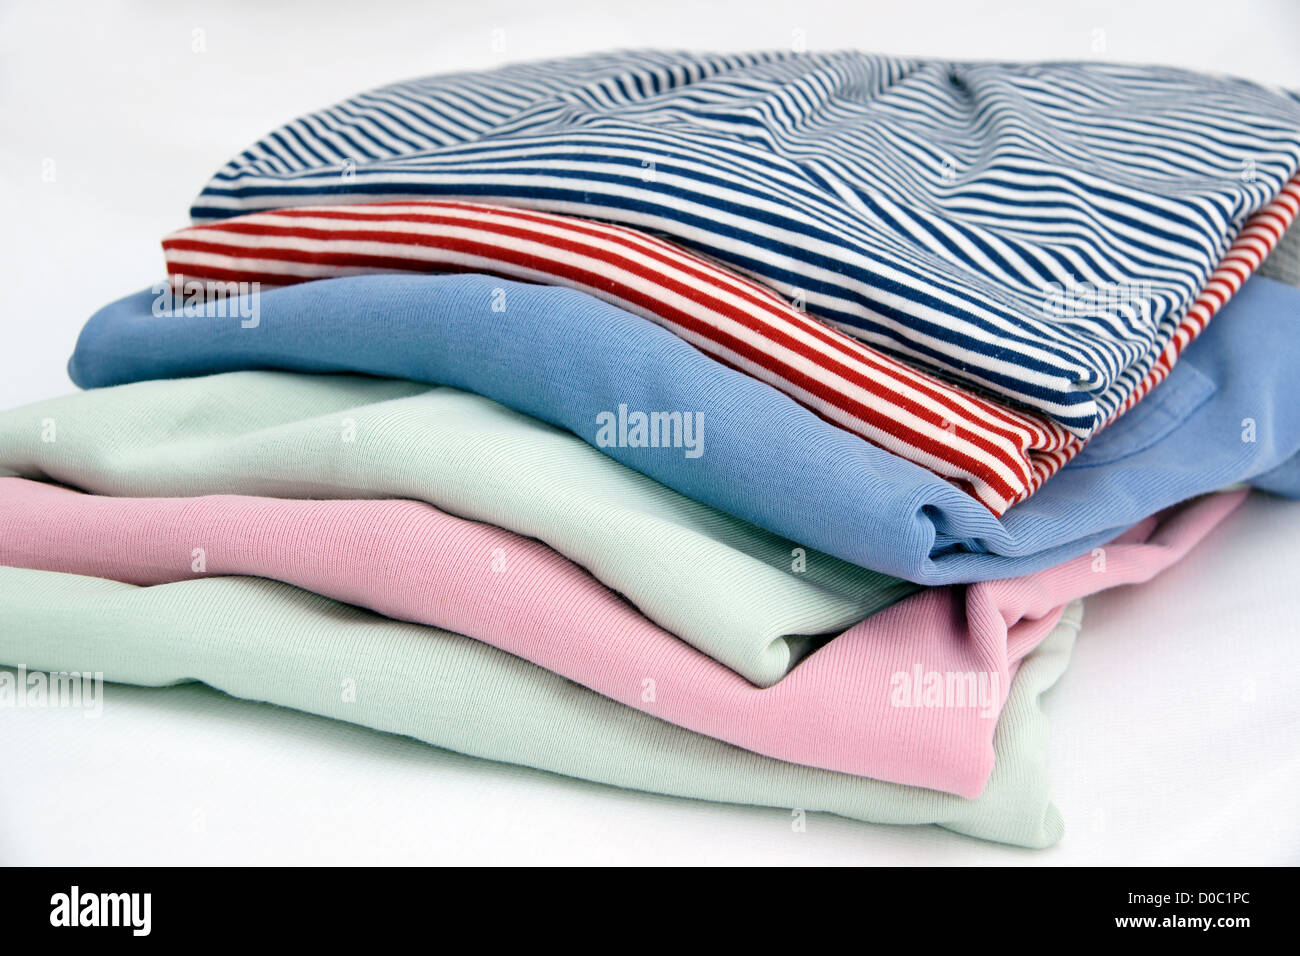 Pile of ladies jumpers / sweaters / tops isolated on a white background Stock Photo